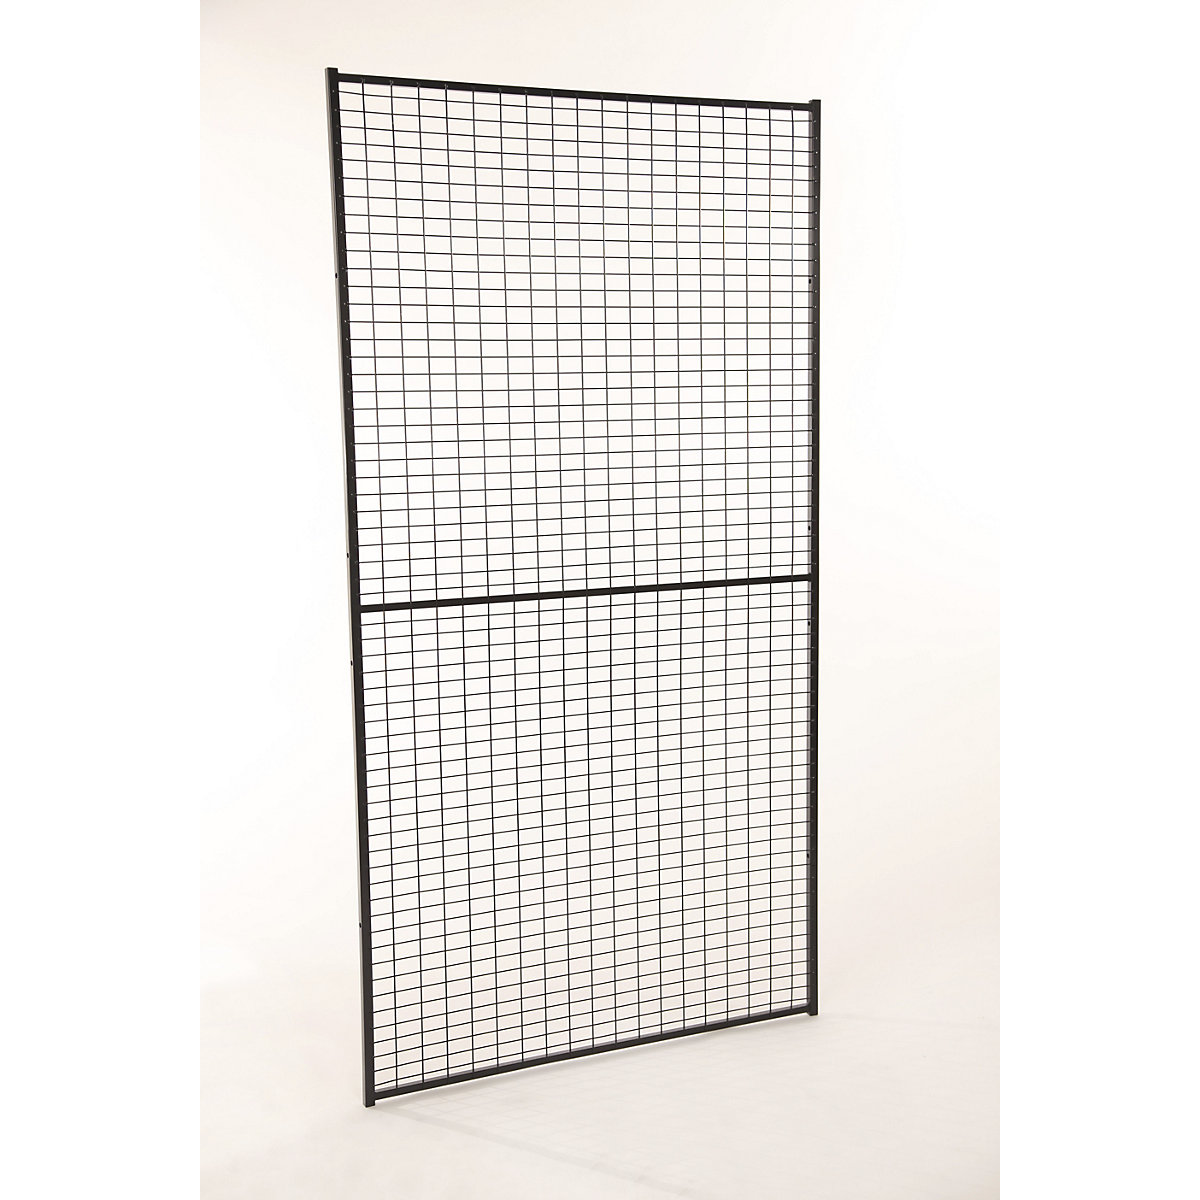 X-GUARD LITE machine protective fencing, wall section – Axelent, height 2200 mm, width 700 mm-3